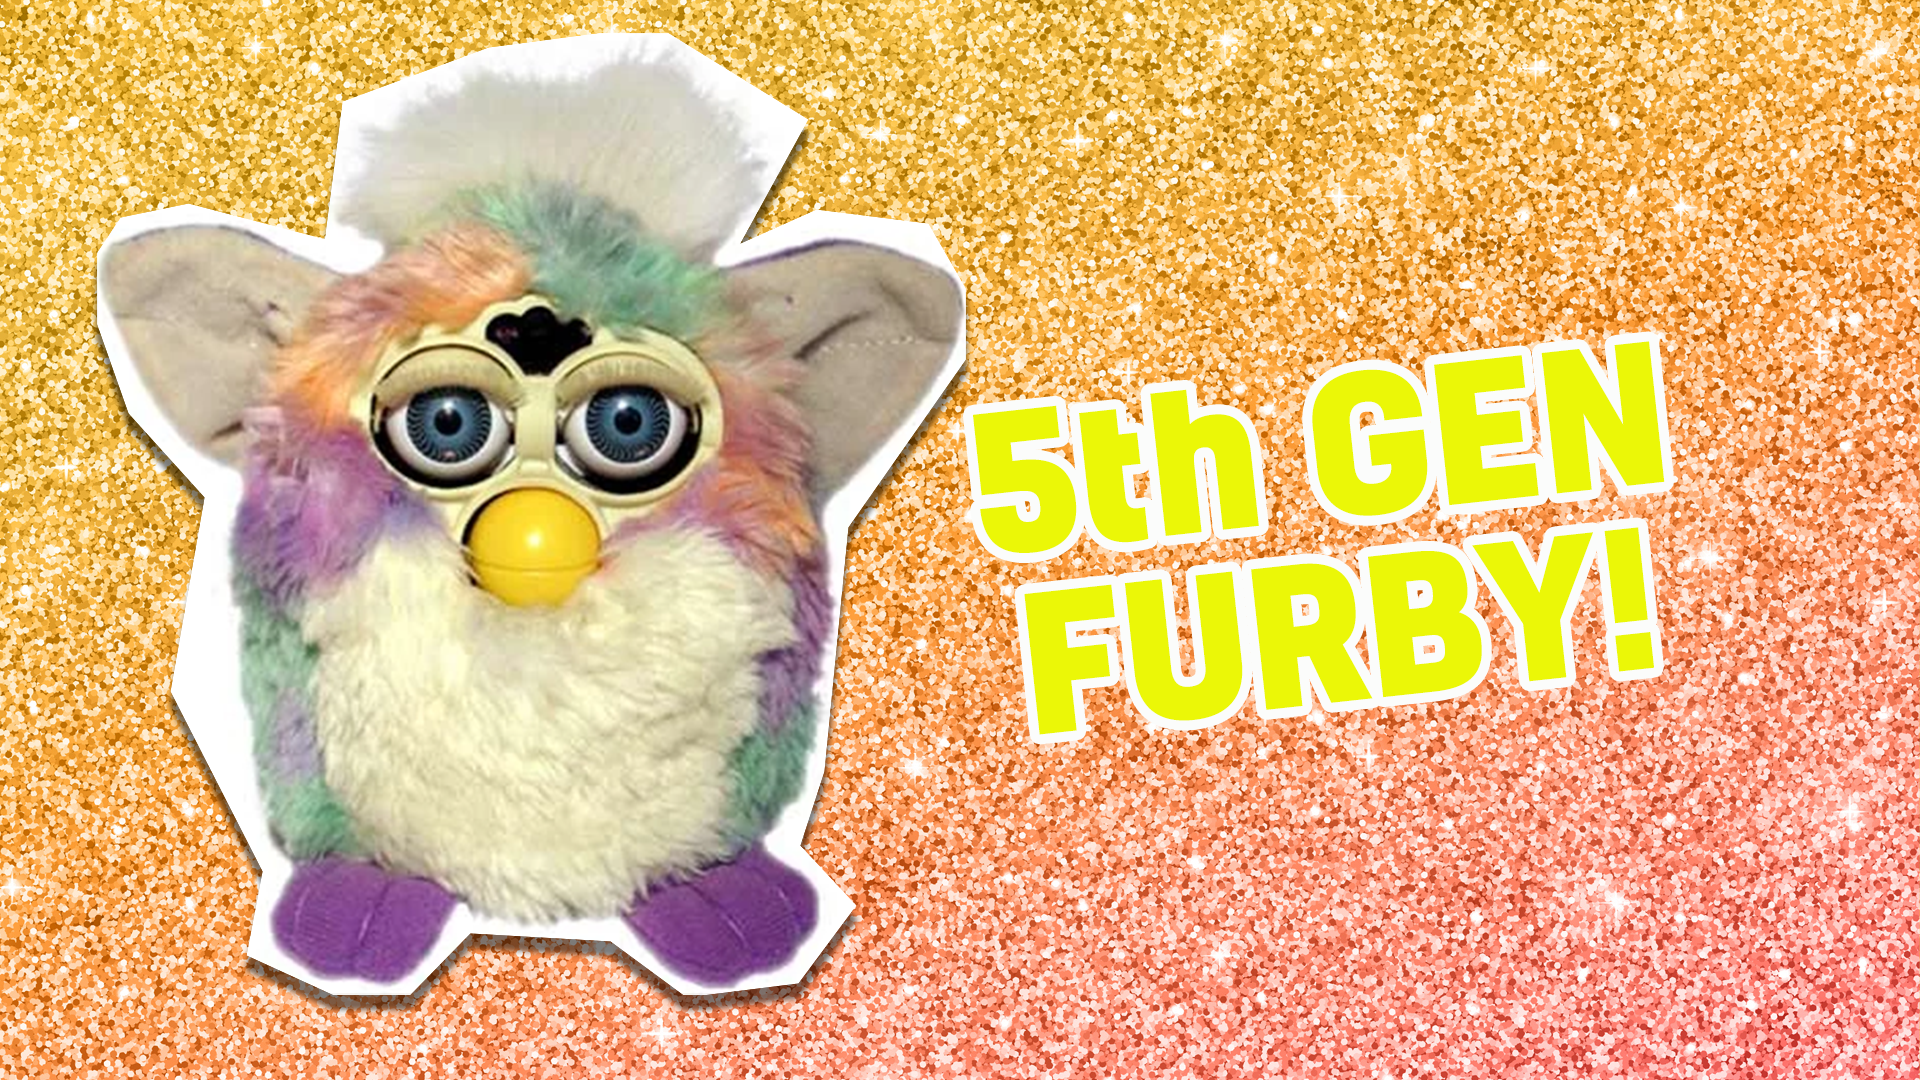 You're a 5th Generation Furby! You're fun, brightly coloured and an improvement on a classic! You're old enough now to have some added nostalgia value too!